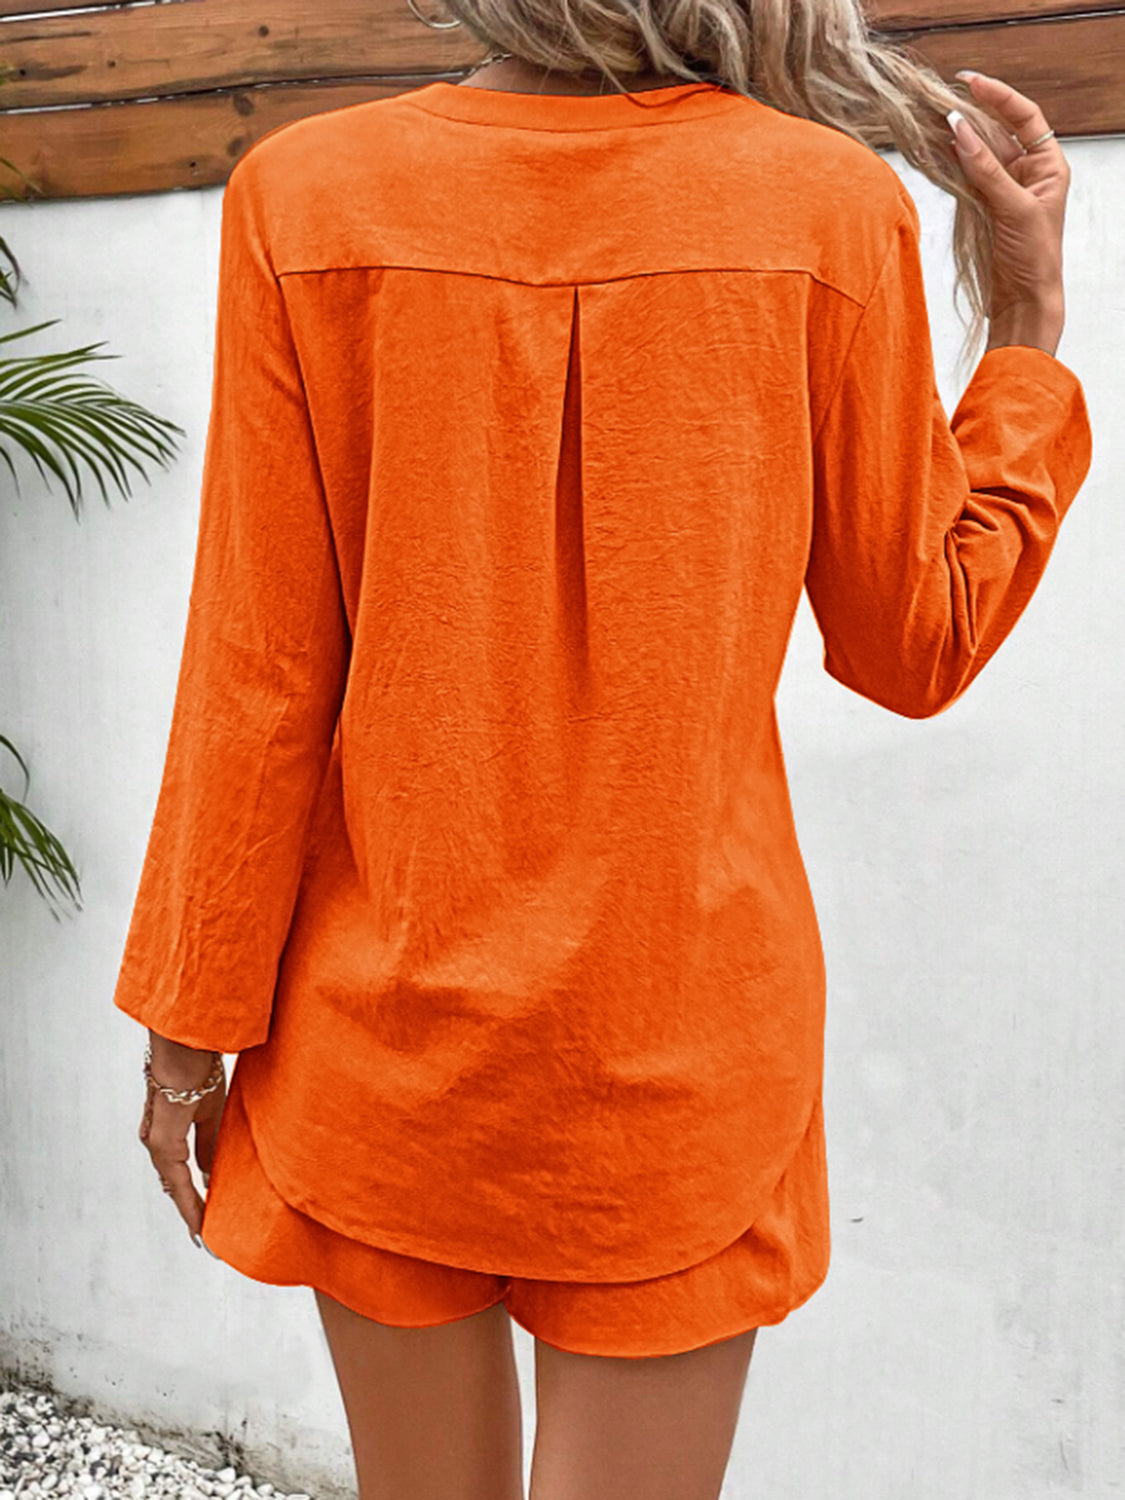 Notched V-Neck Button Front Rolled Long Sleeve Top and Shorts Set in Multiple Colors Southern Soul Collectives